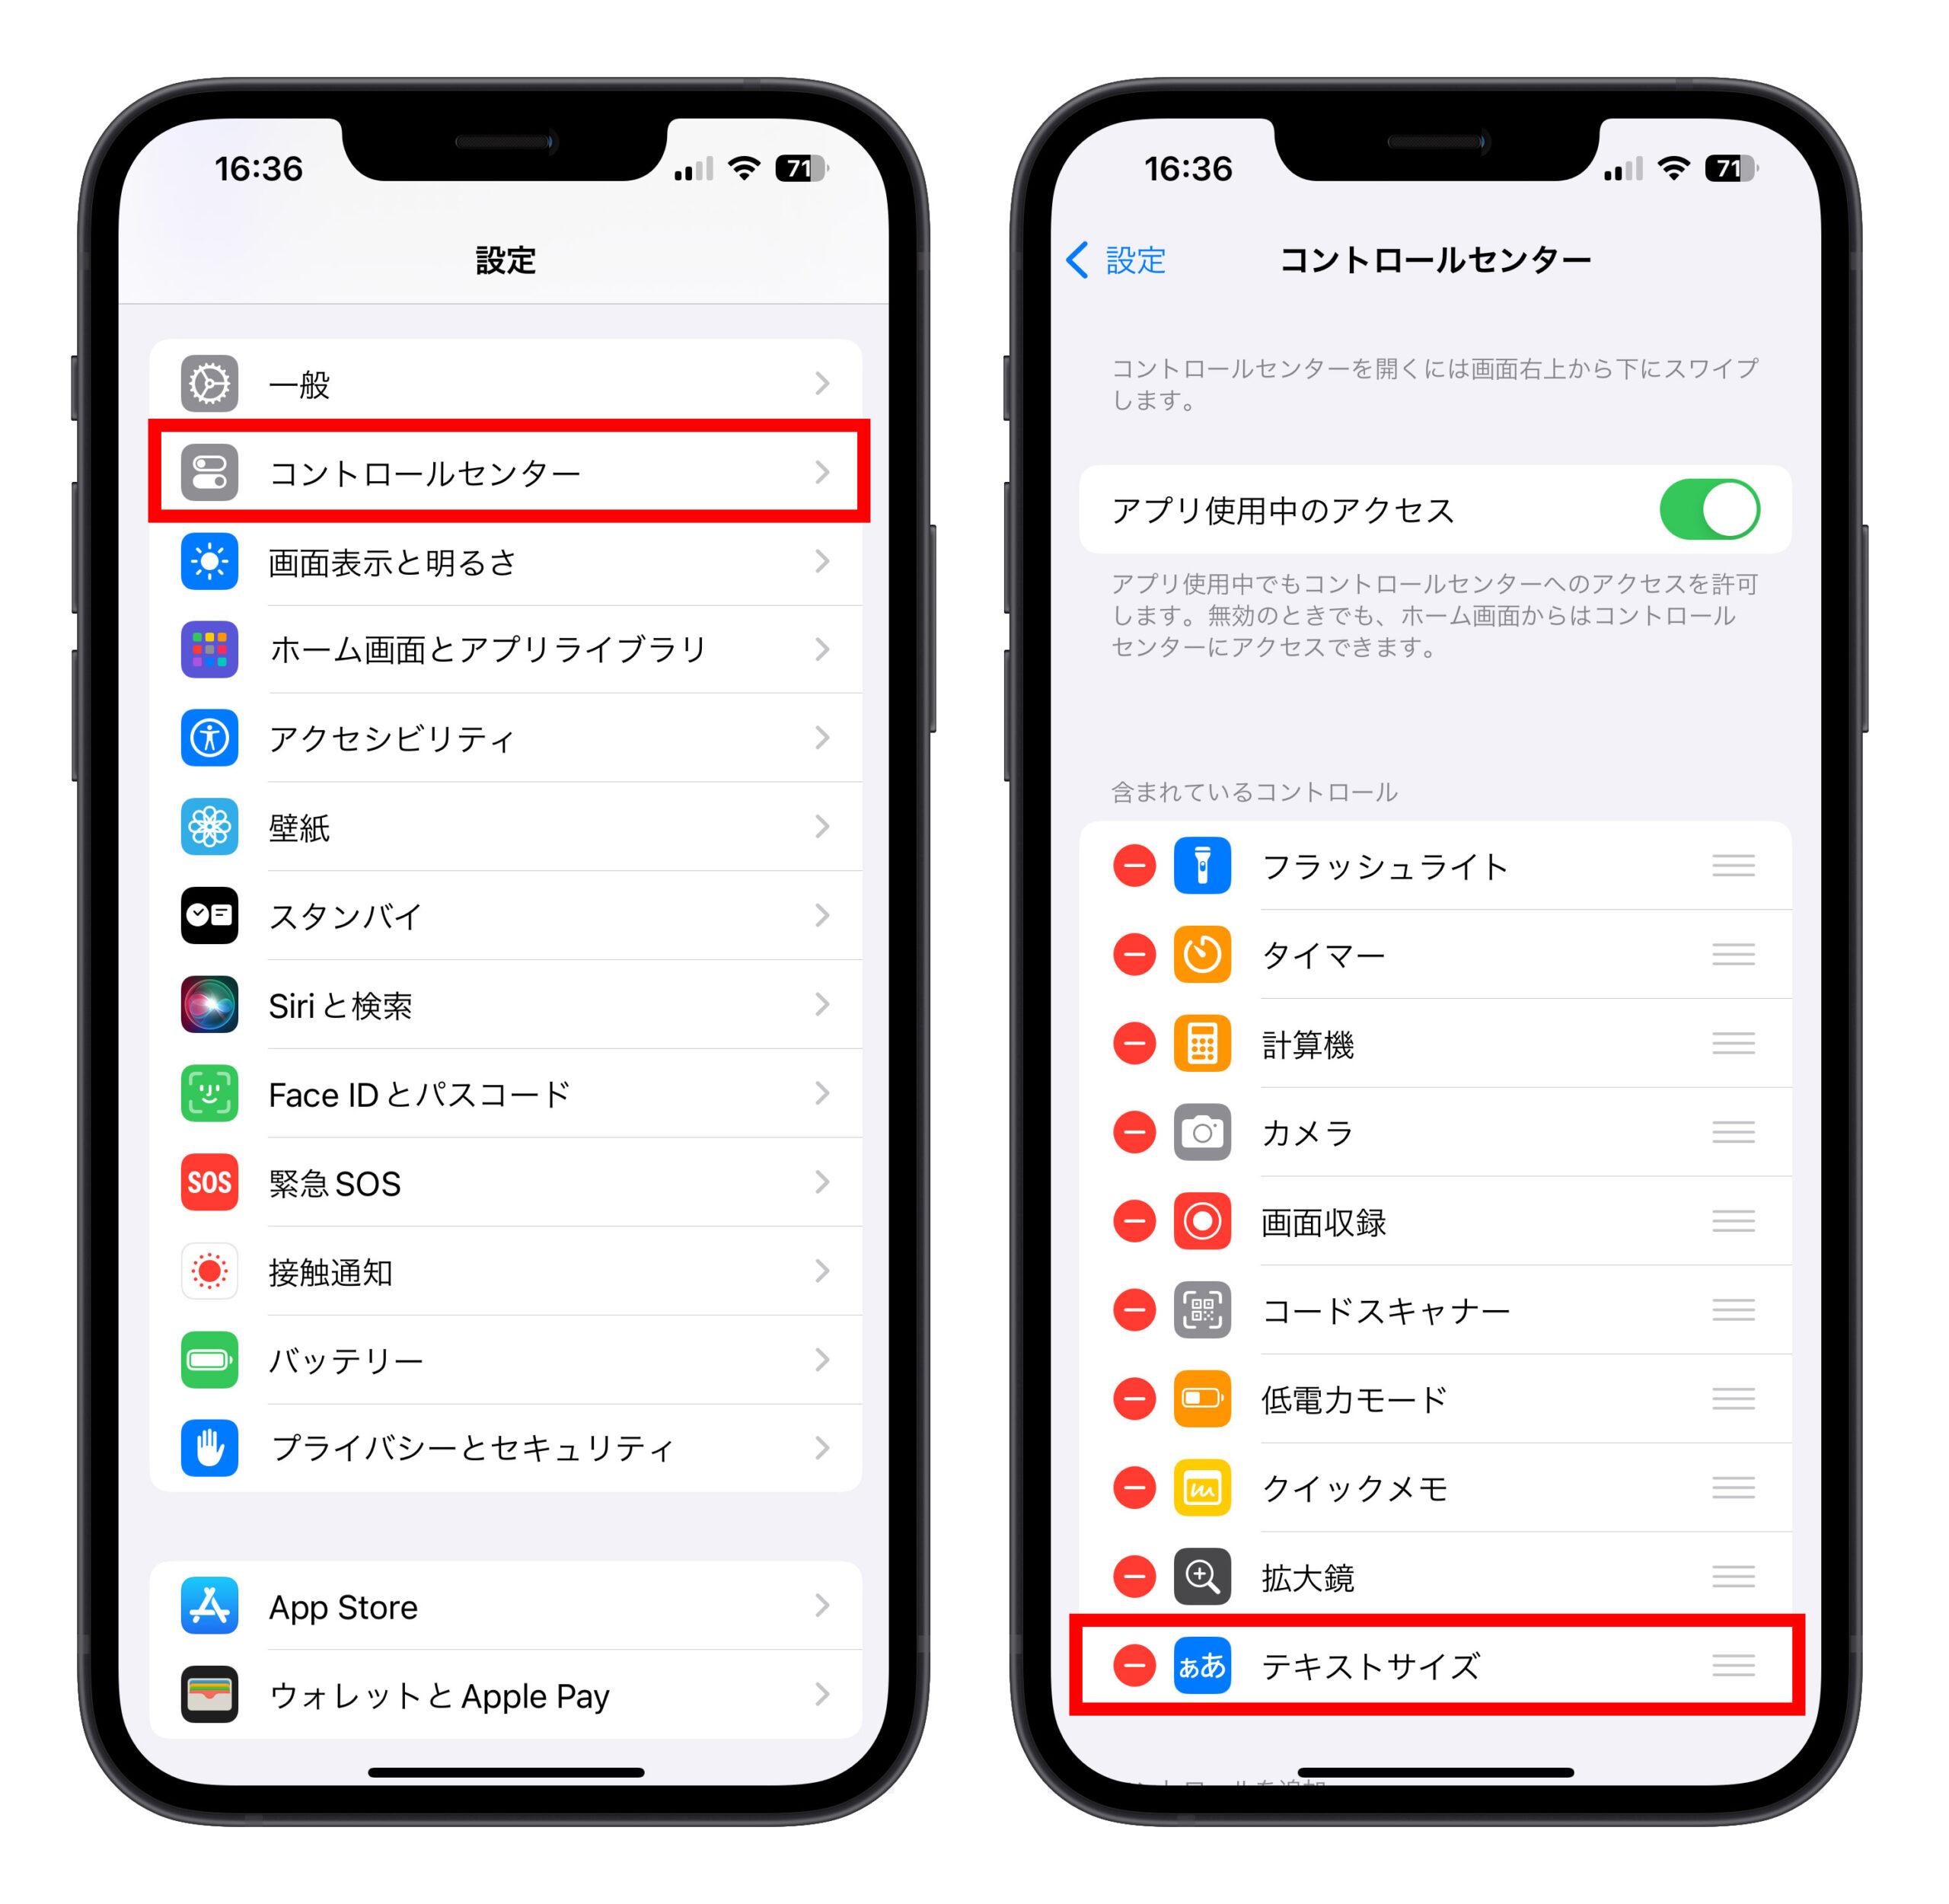 iPhone コントロールセンター 文字サイズ